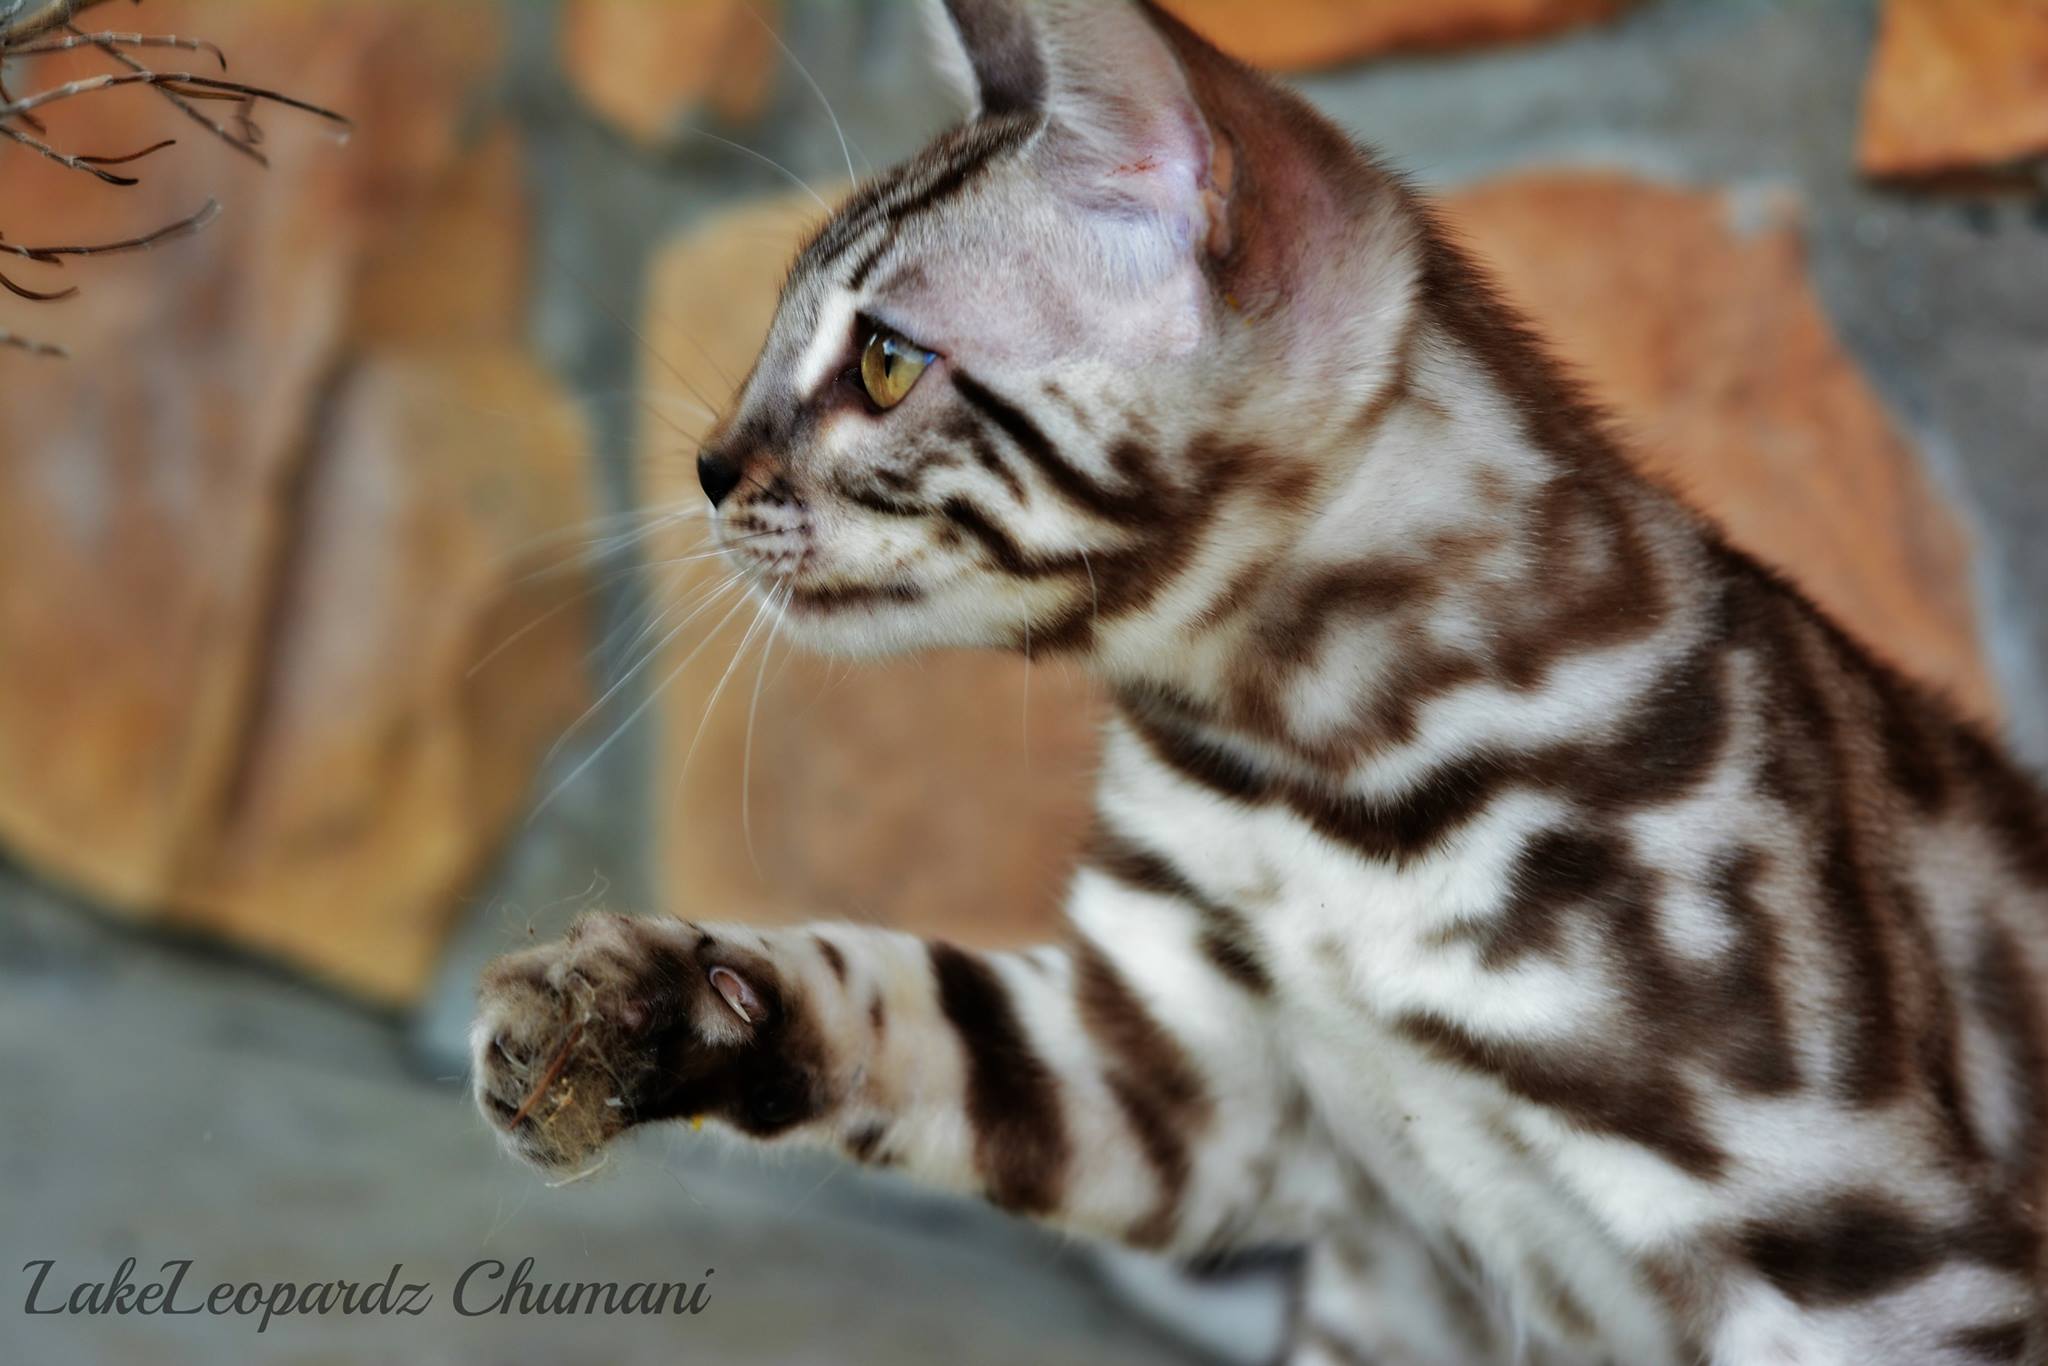 CH. LakeLeopardz Chumani of NW Bengalcats, Silver Sepia Spotted